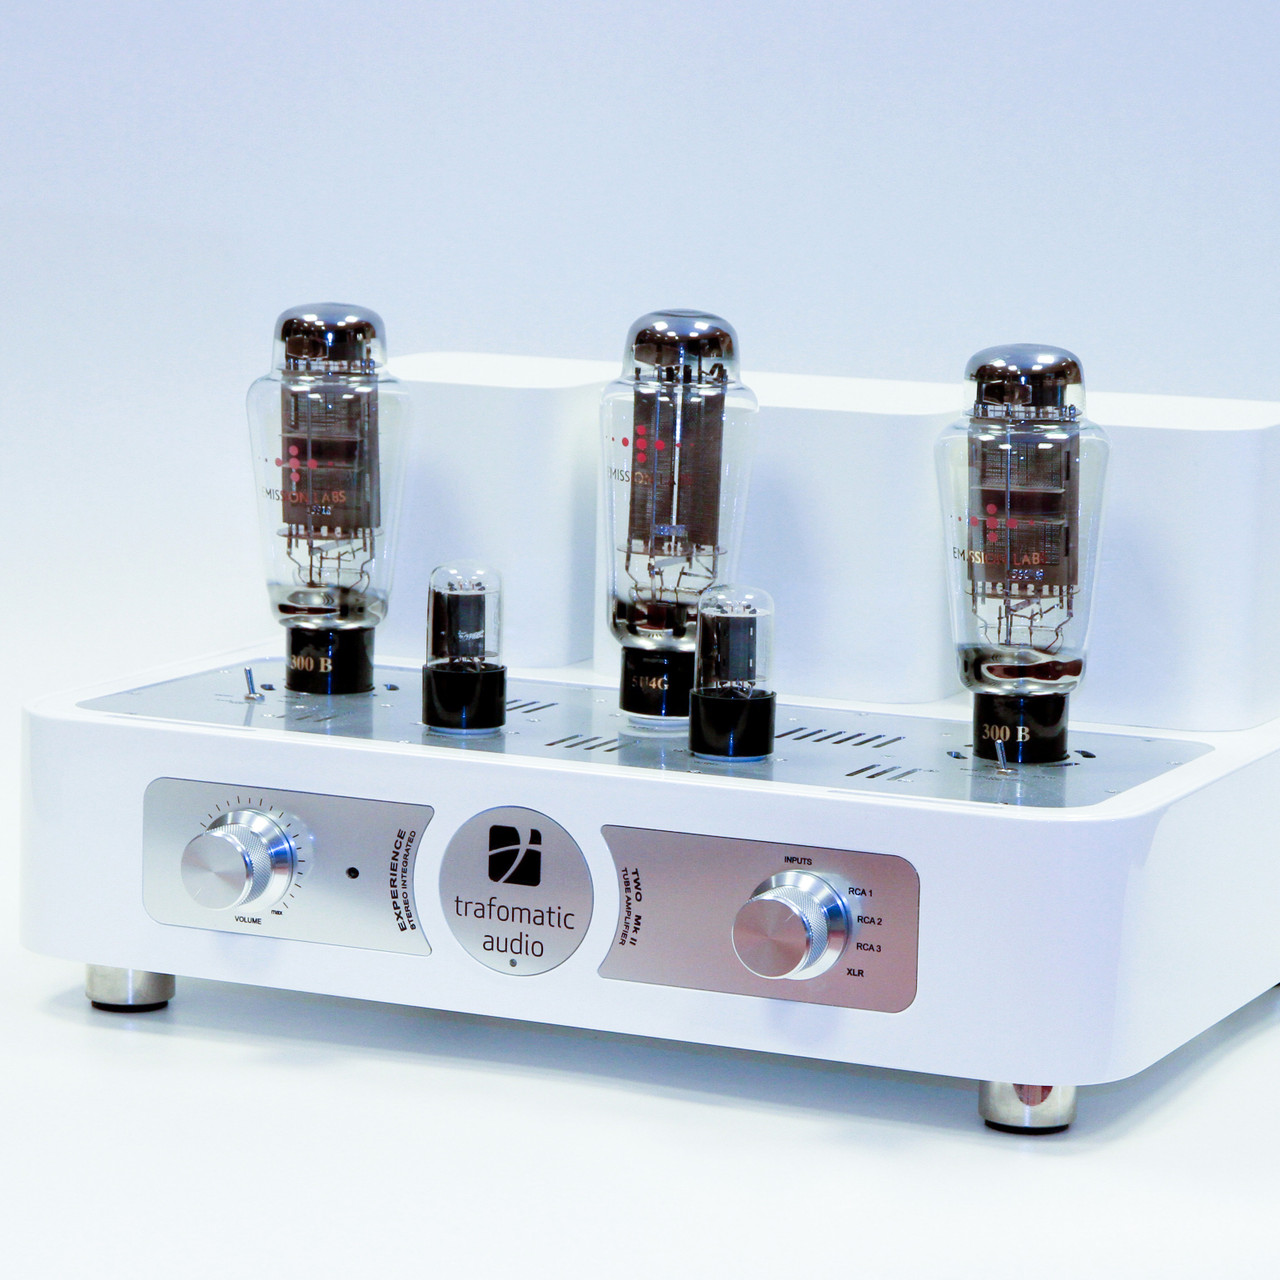 Trafomatic Experience Two Mk2 300B integrated amplifier